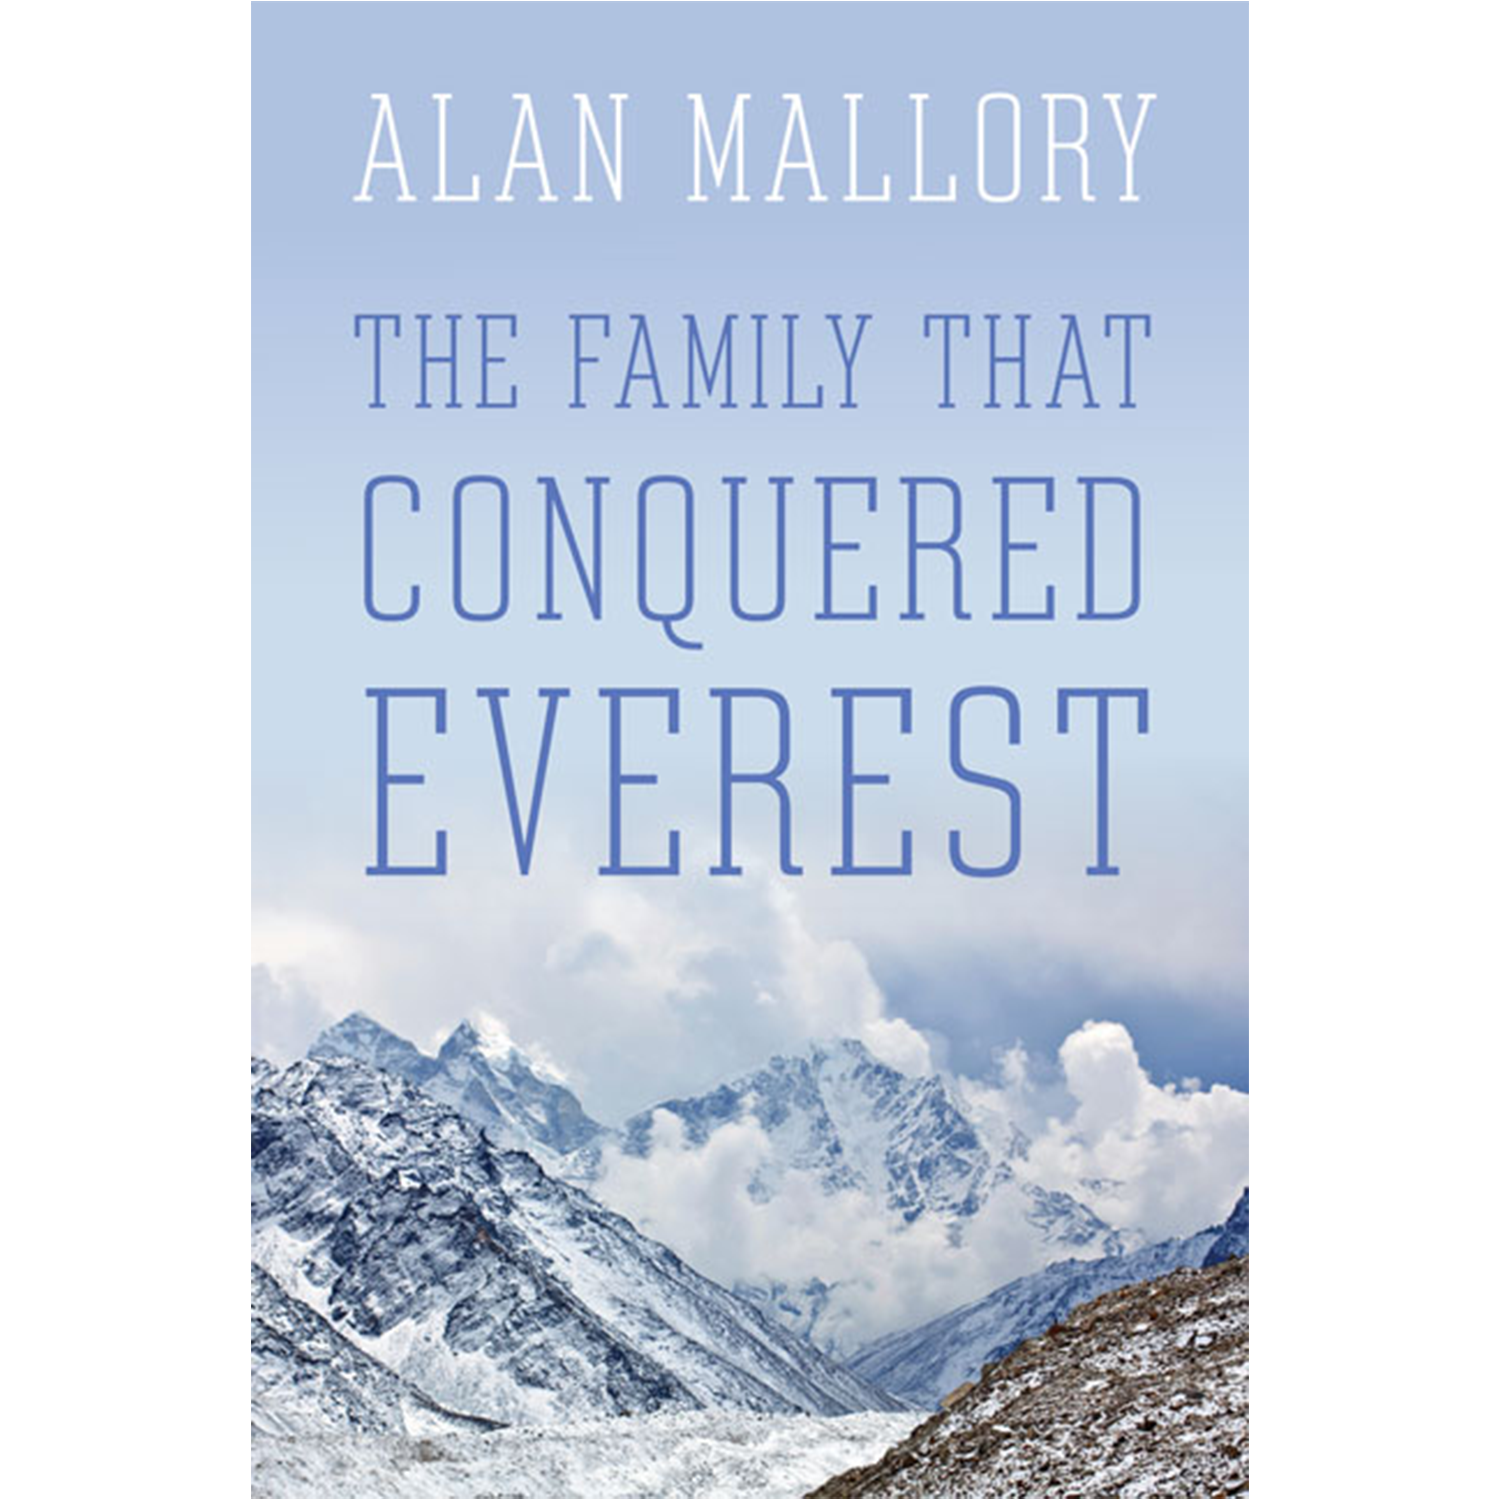 The Family that Conquered Everest